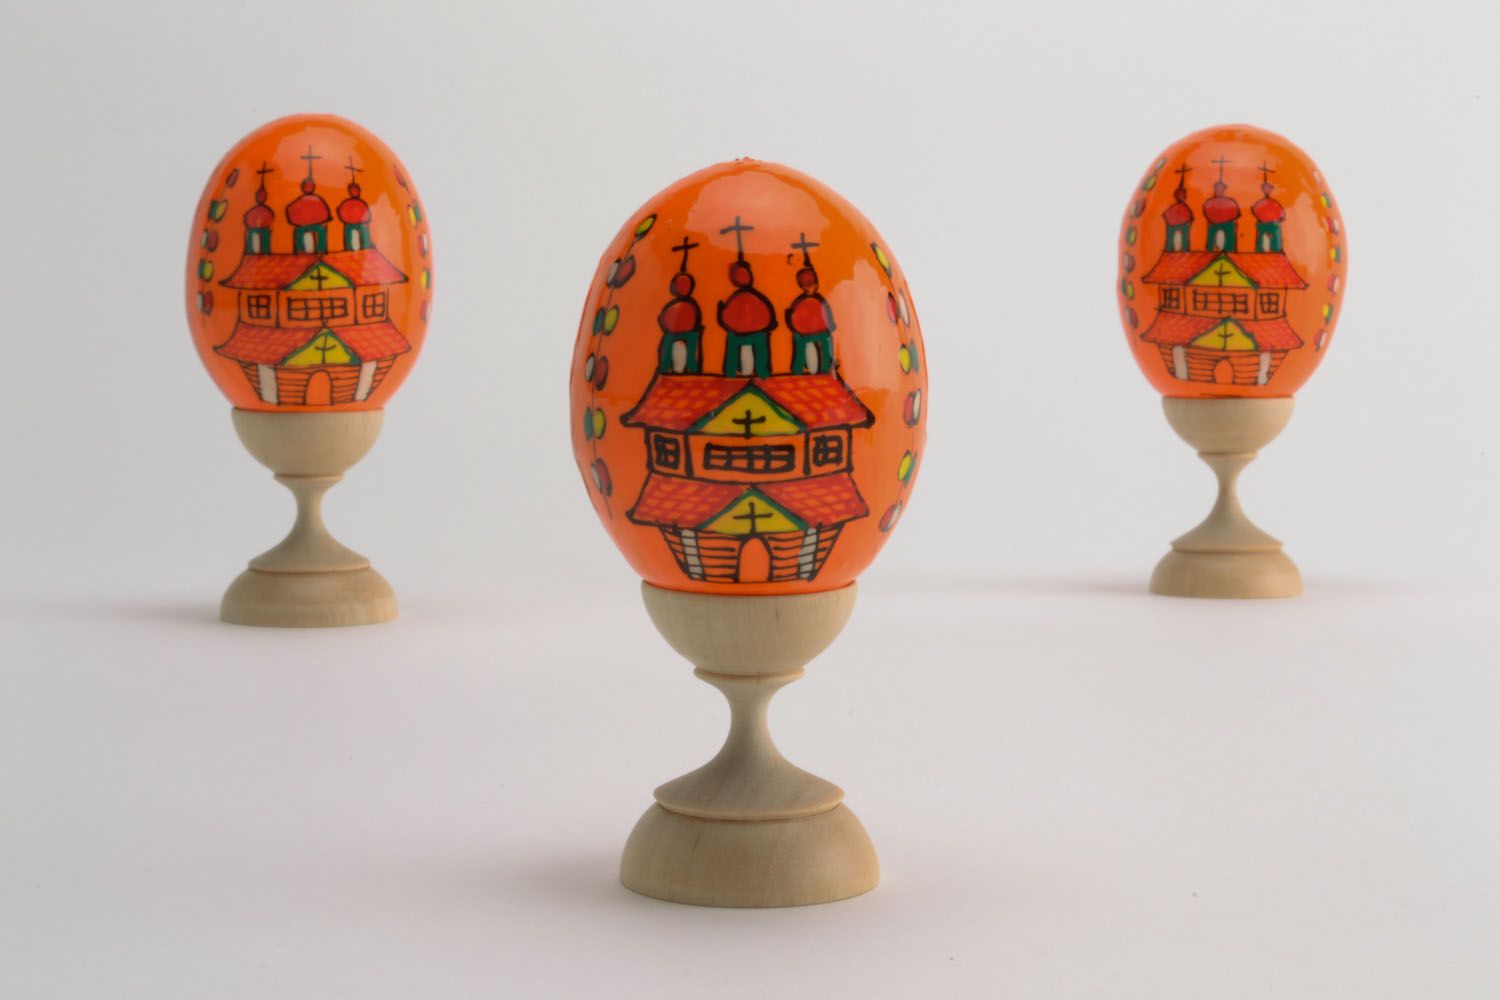 Wooden painted egg photo 1